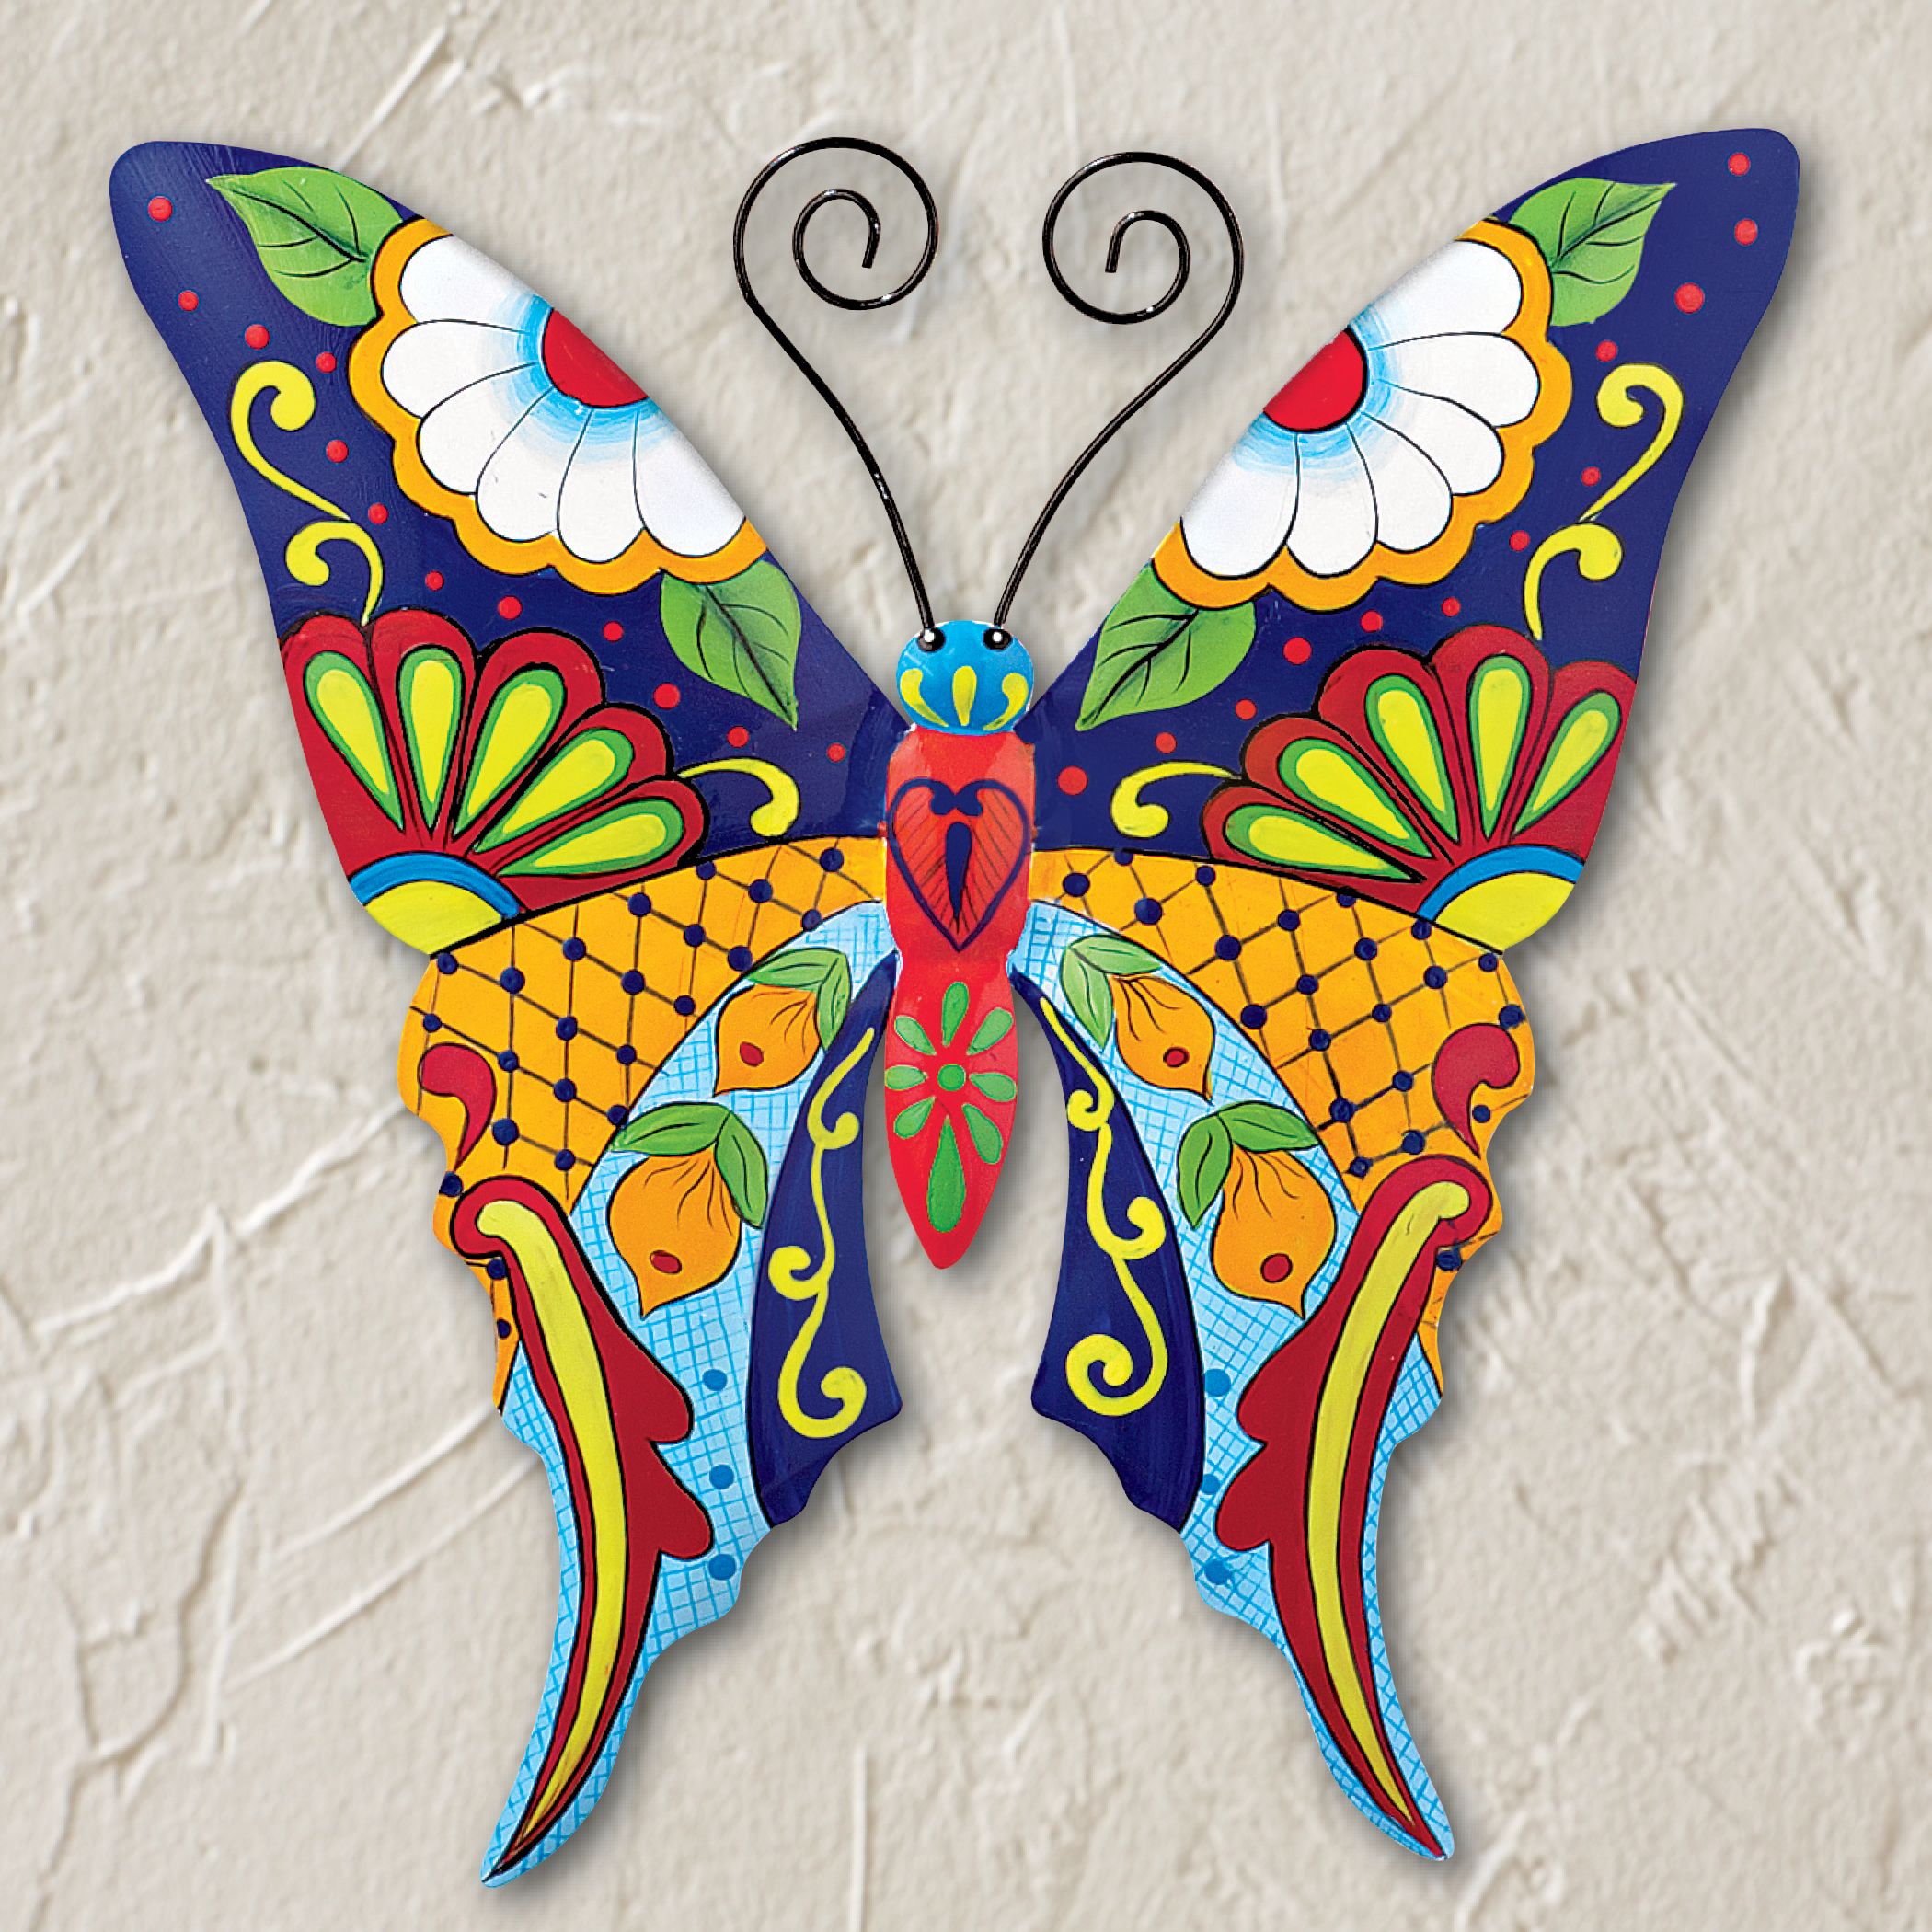 Colorful Metal Hanging Wall Decor Intended For Dragonfly Wall Decor (View 29 of 30)